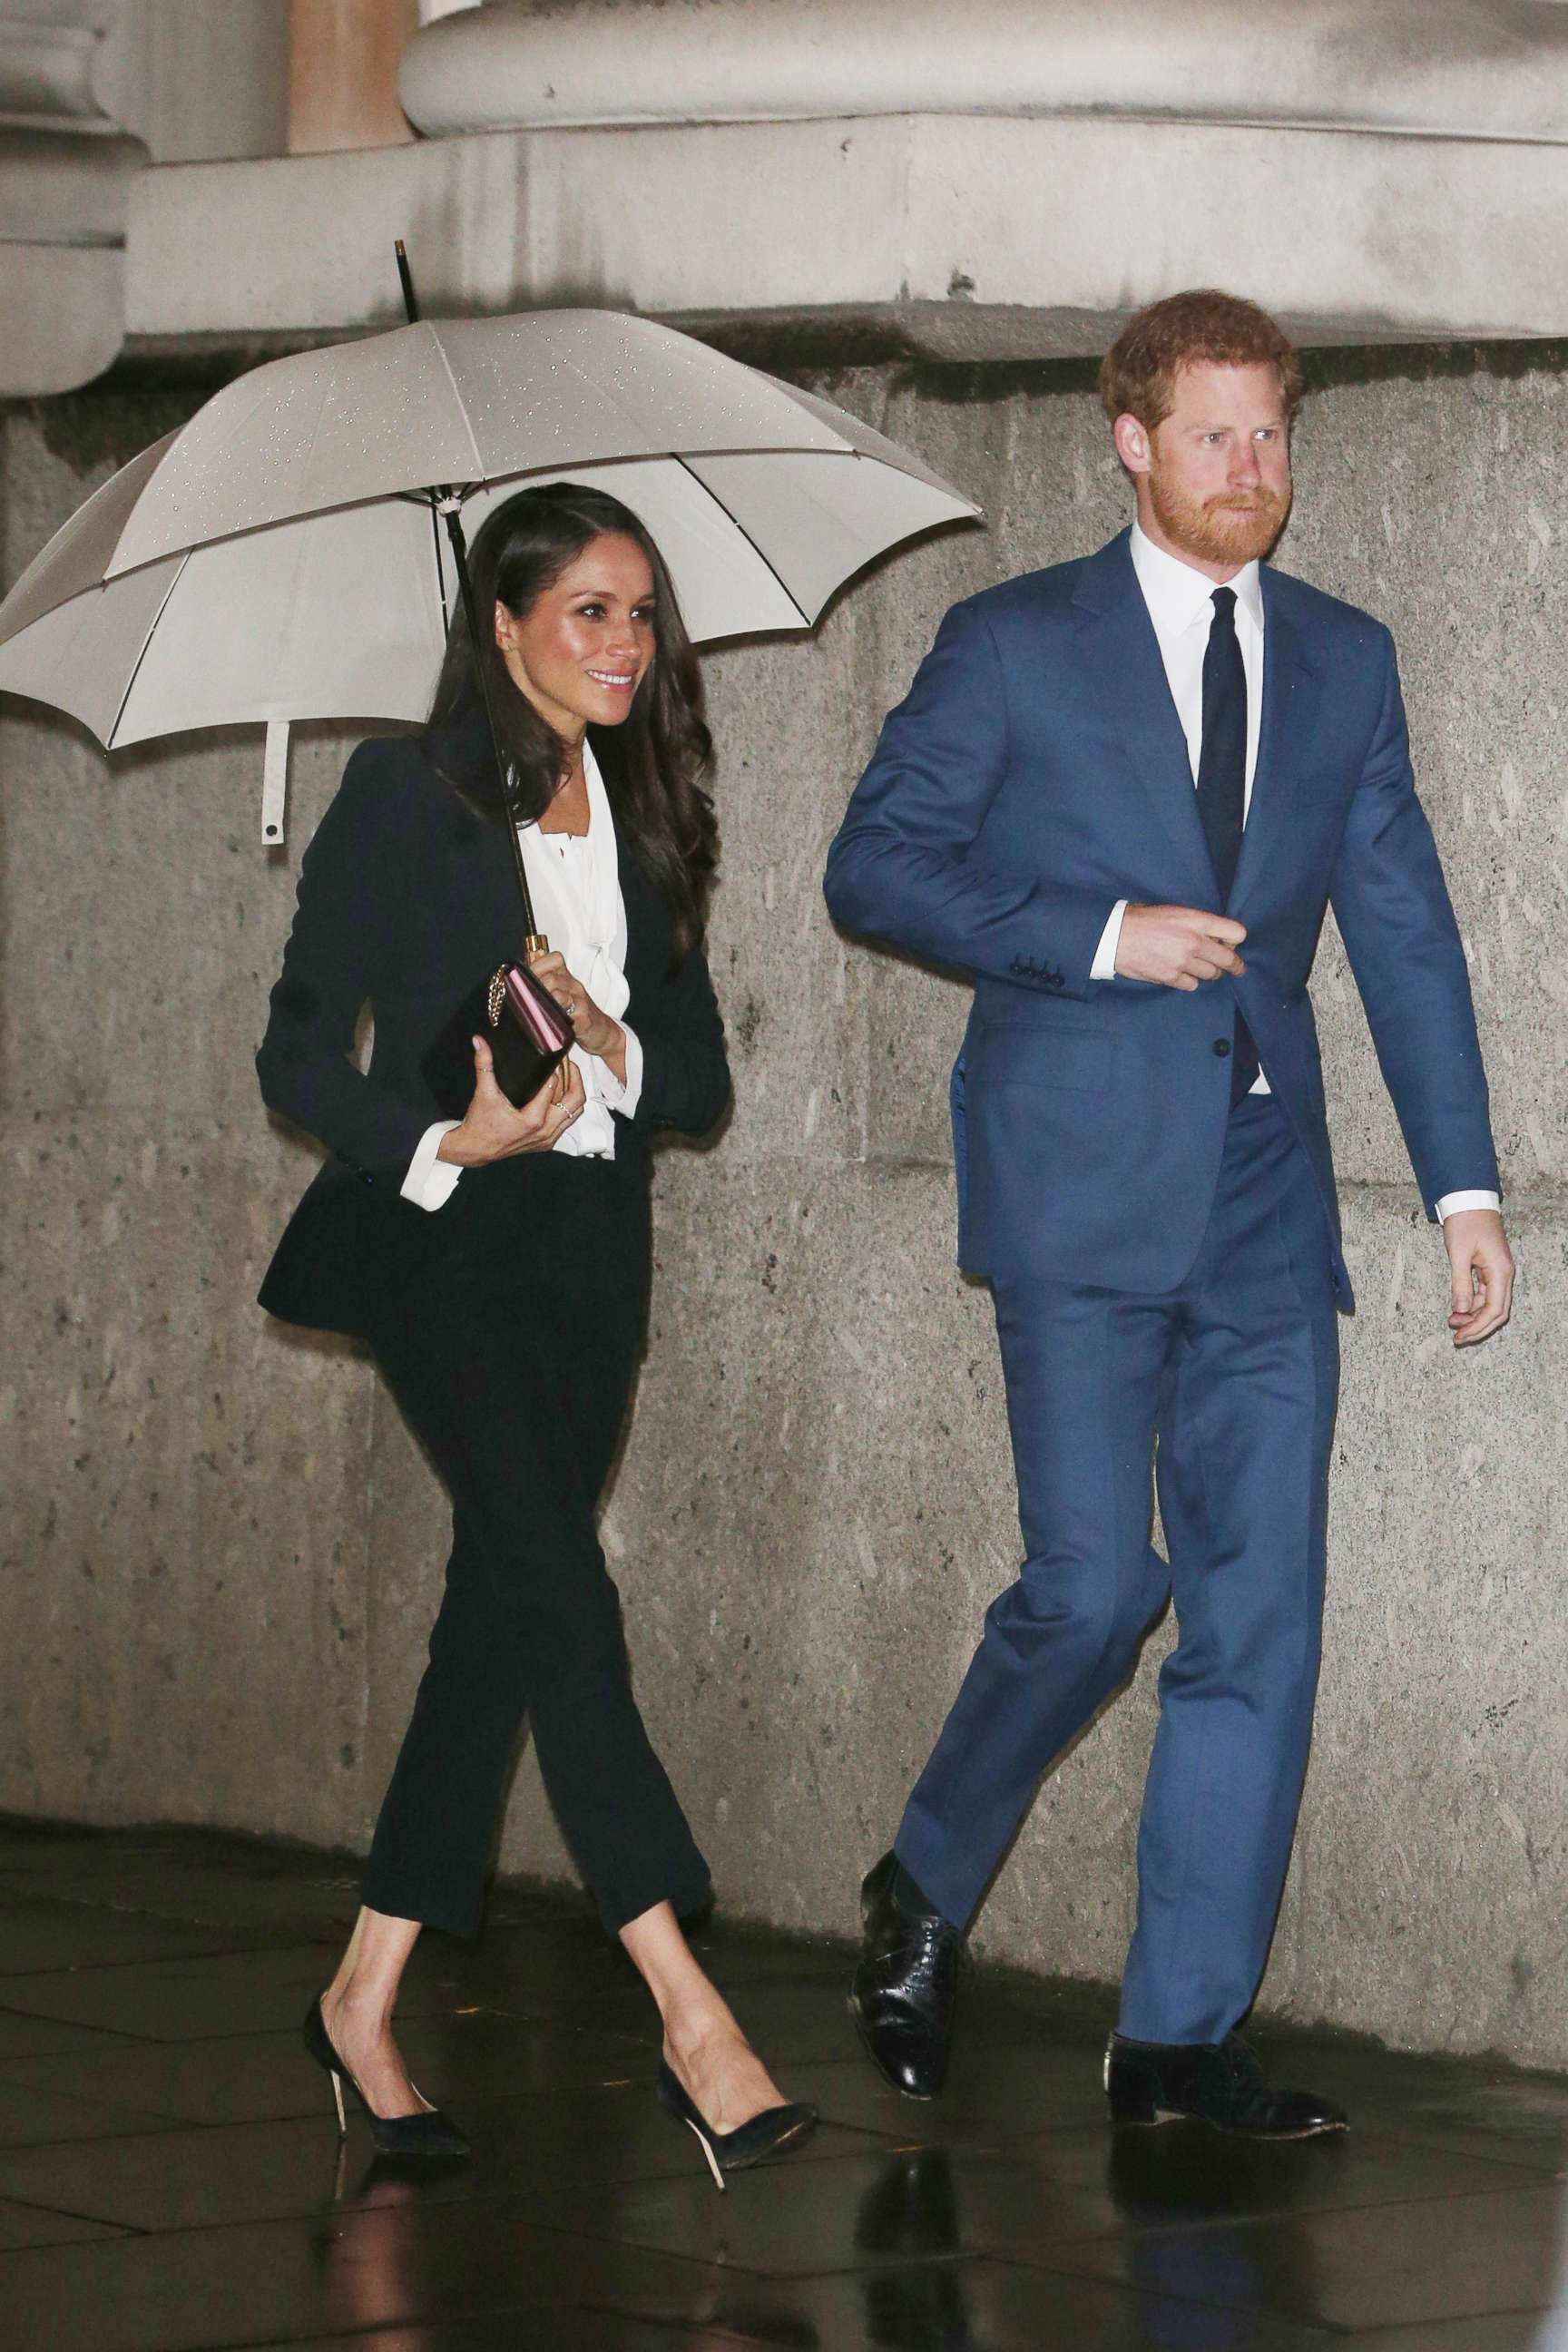 PHOTO: Meghan Markle and Prince Harry arrive at the Endeavor Fund Awards in London, Feb. 1, 2018. 